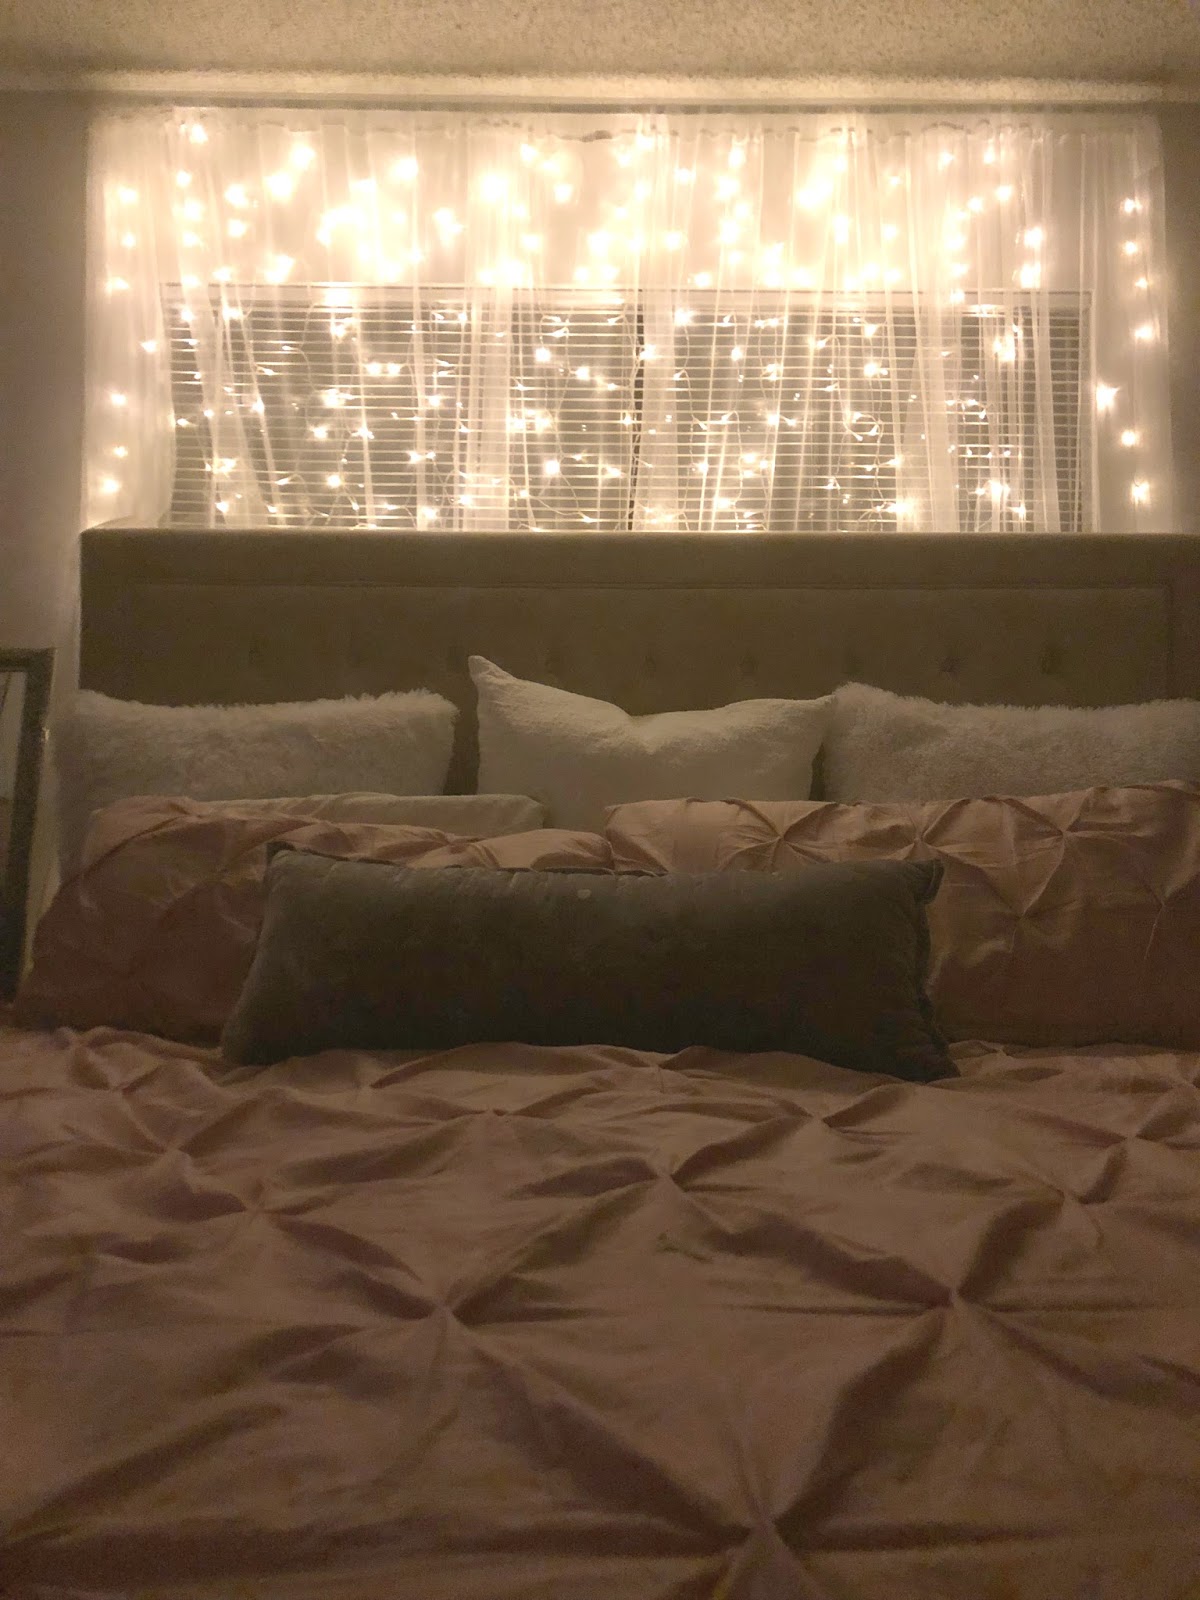 HELLO CRISST: DIY LIGHT WALL! How To Make Your Bedroom ...